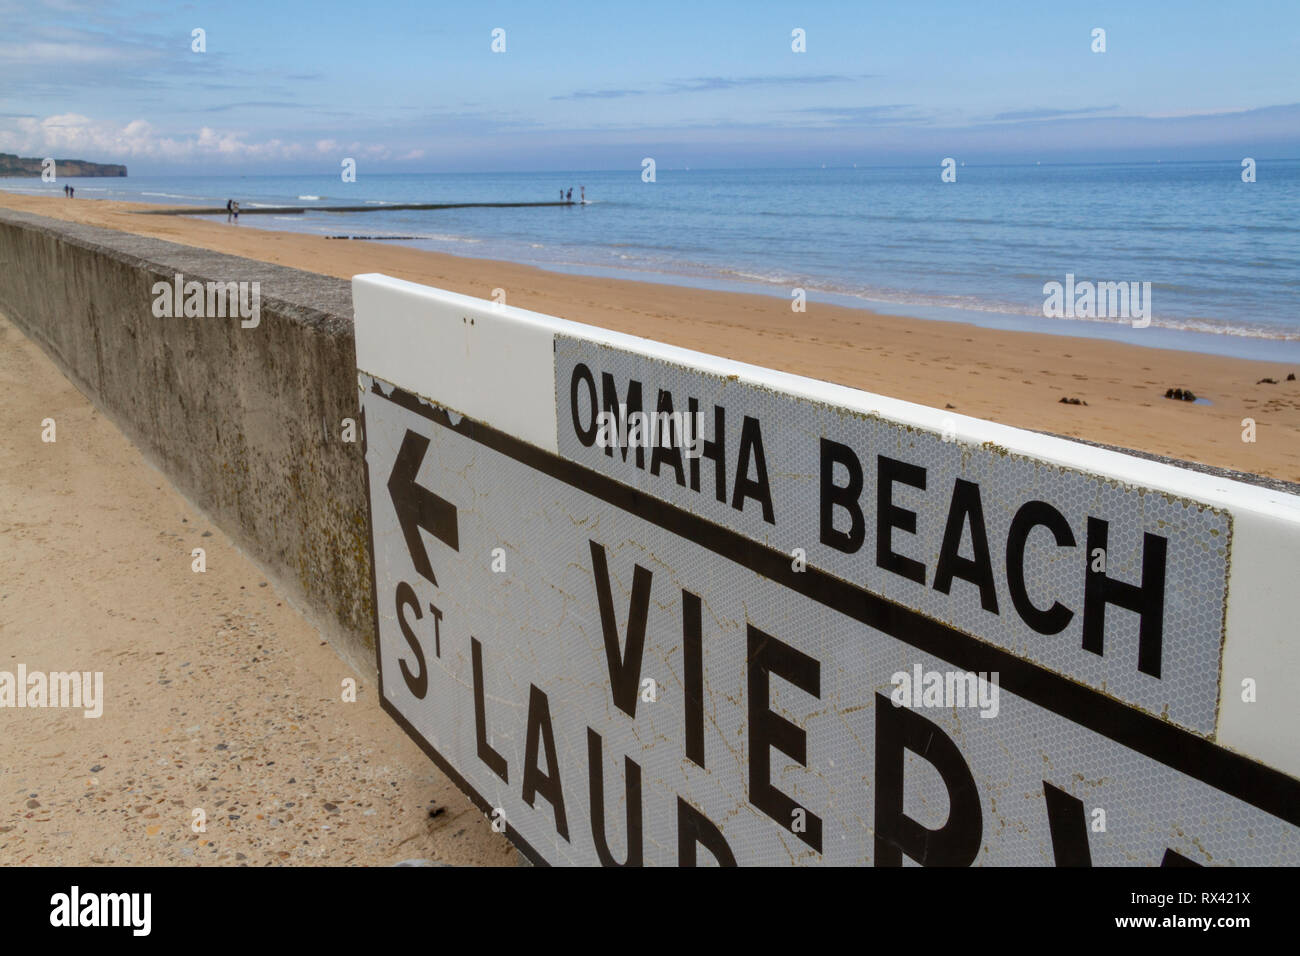 Road sign on Omaha Beach between Vierville and St Laurent, Normandy, France. Stock Photo